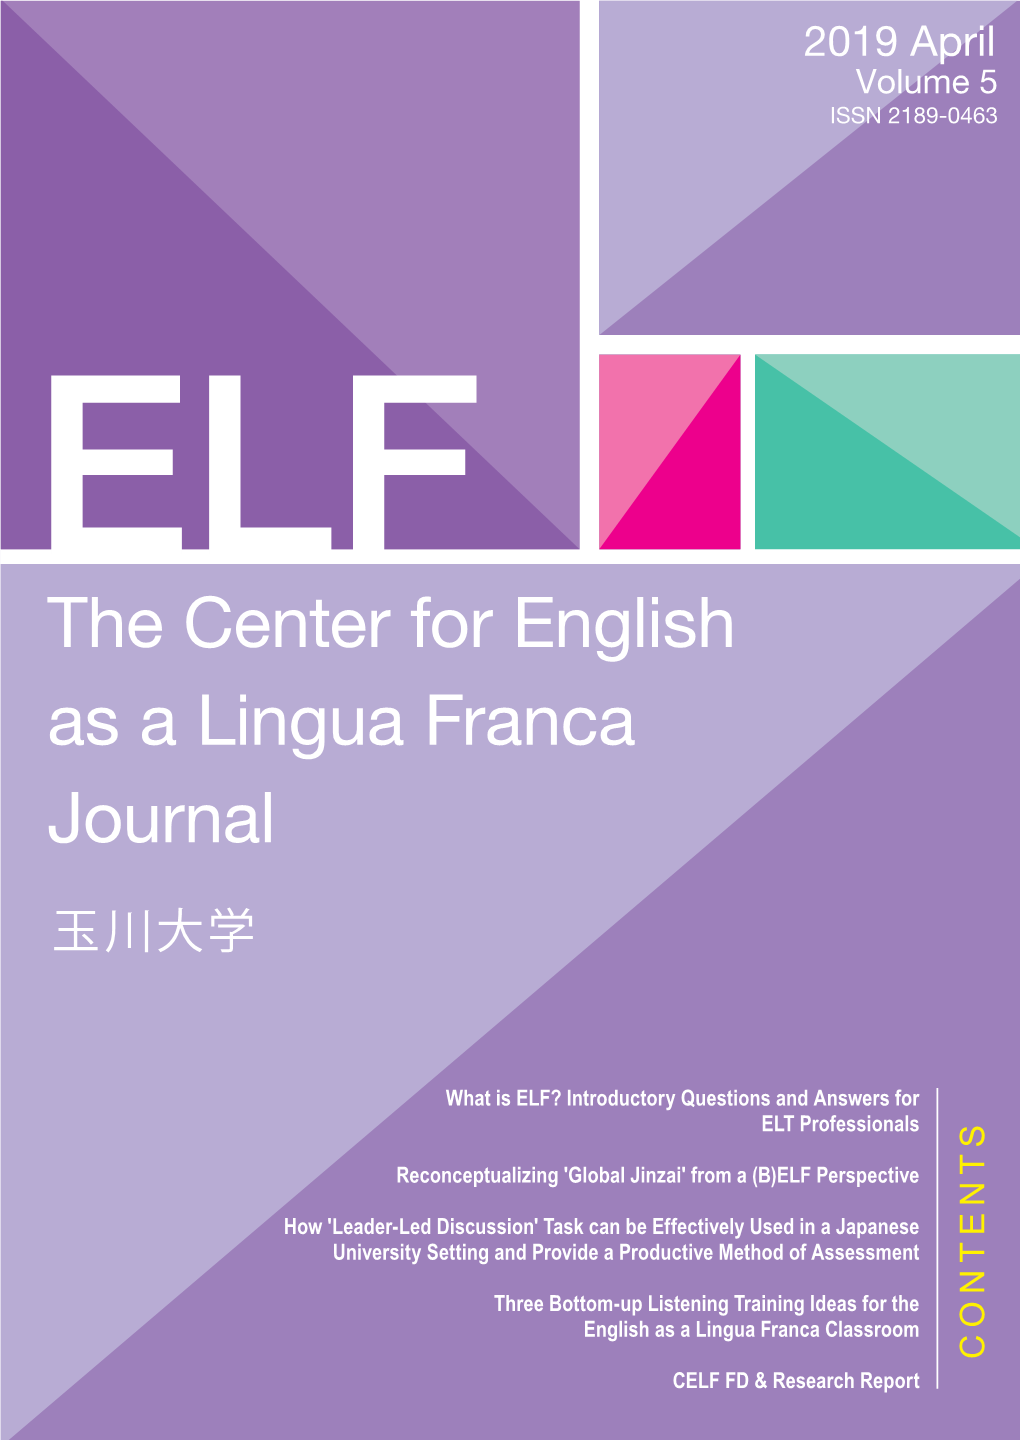 The Center for English As a Lingua Franca Journal 玉川大学